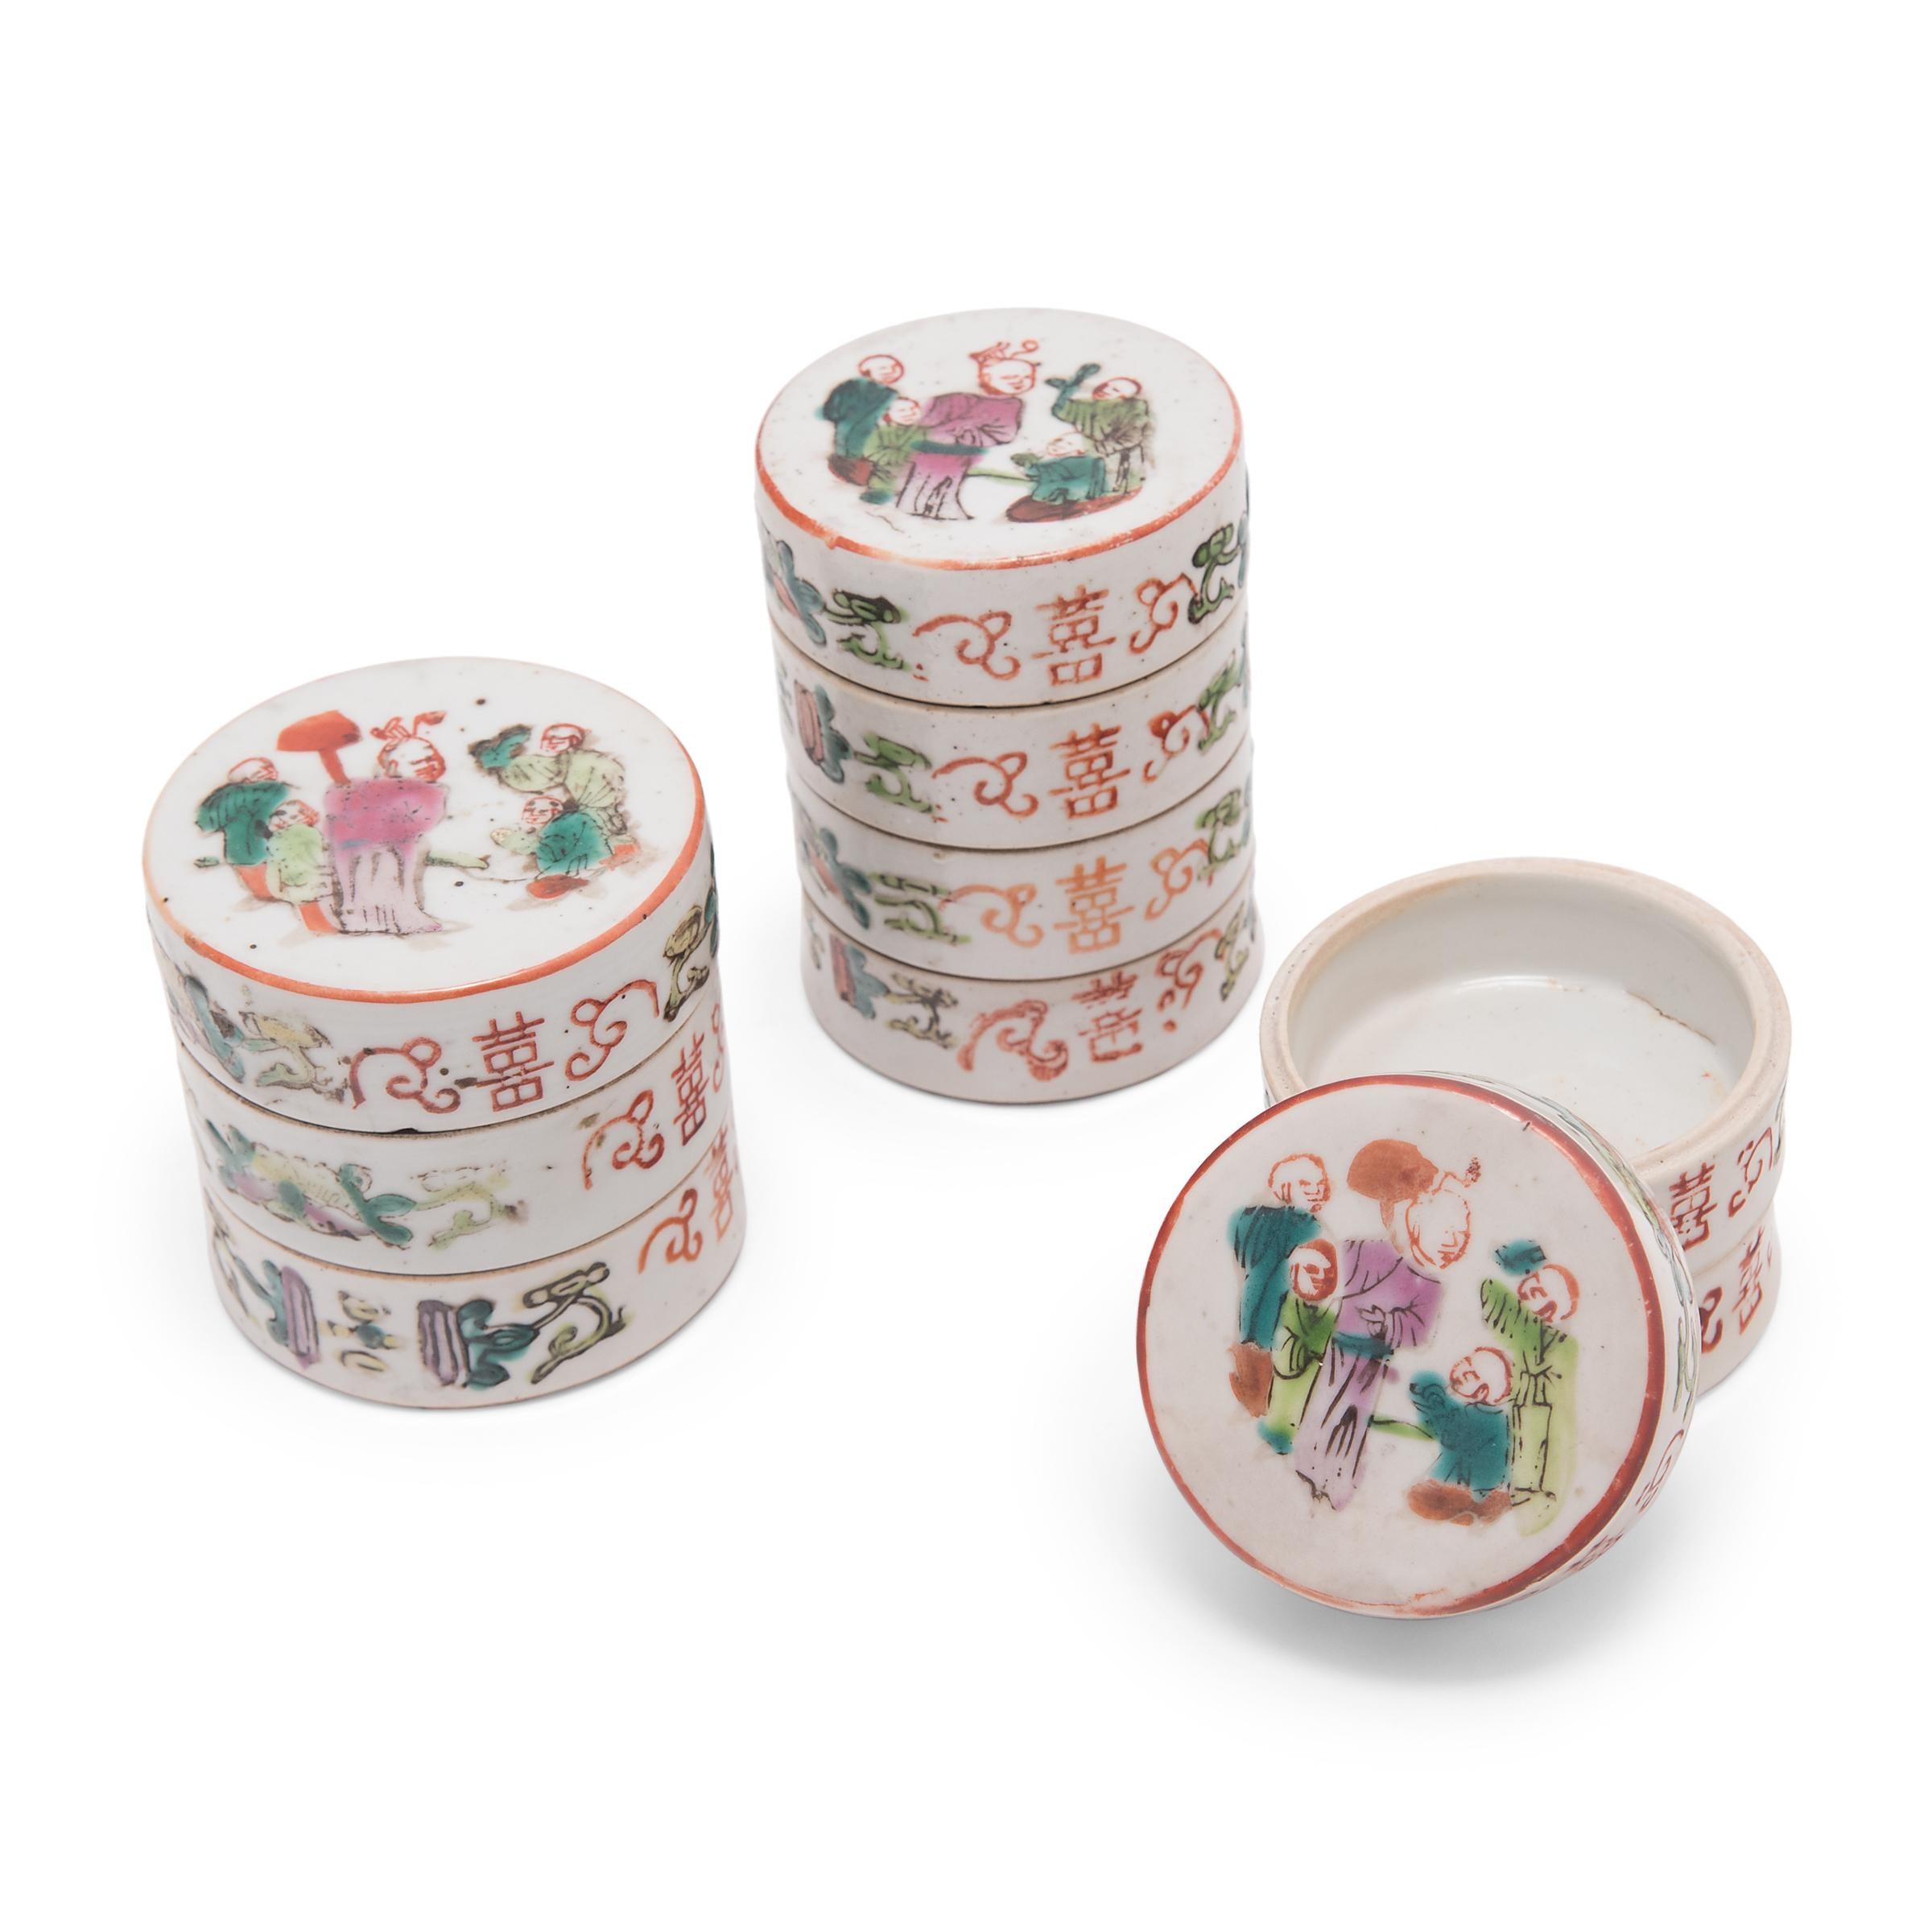 20th Century Chinese Porcelain Stacking Box with Scholarly Gathering, c. 1900